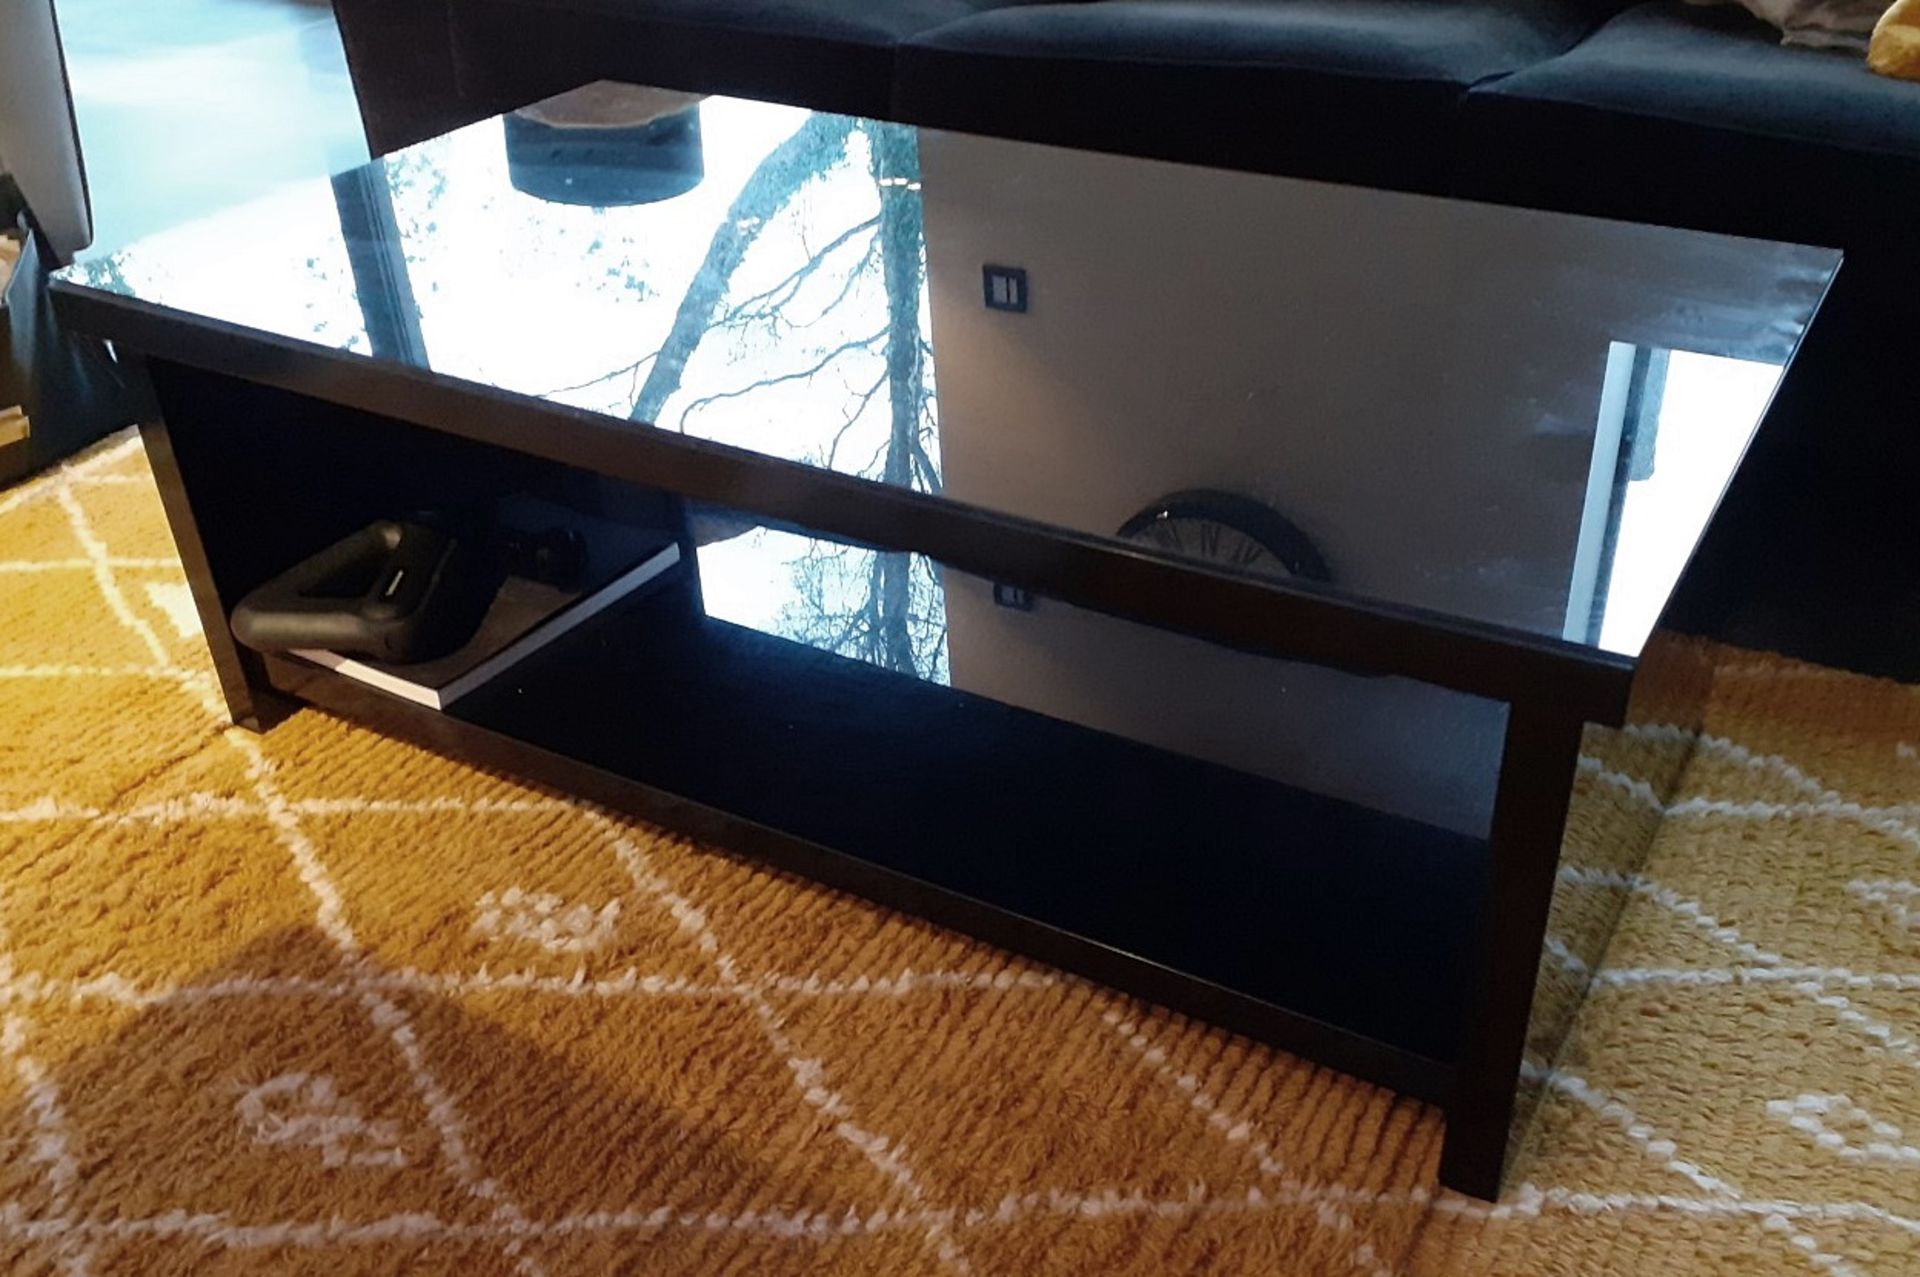 1 x Glass Topped Coffee Table With A Black Gloss Finish - Dimensions: 120 x 65 x H42cm - NO VAT